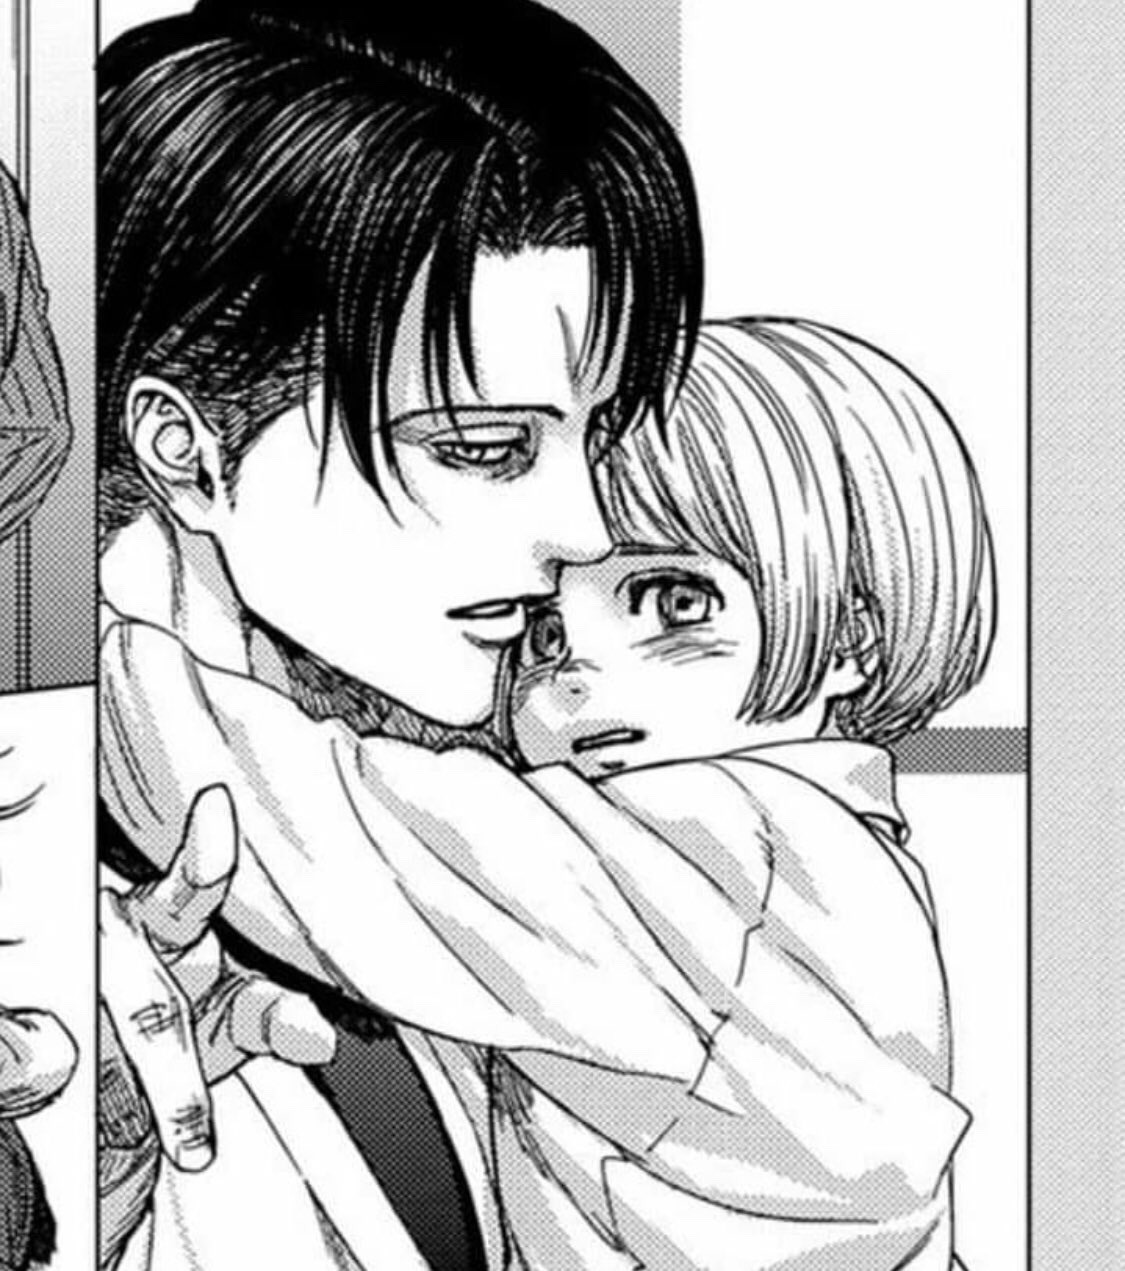 Levi would be such a good dad